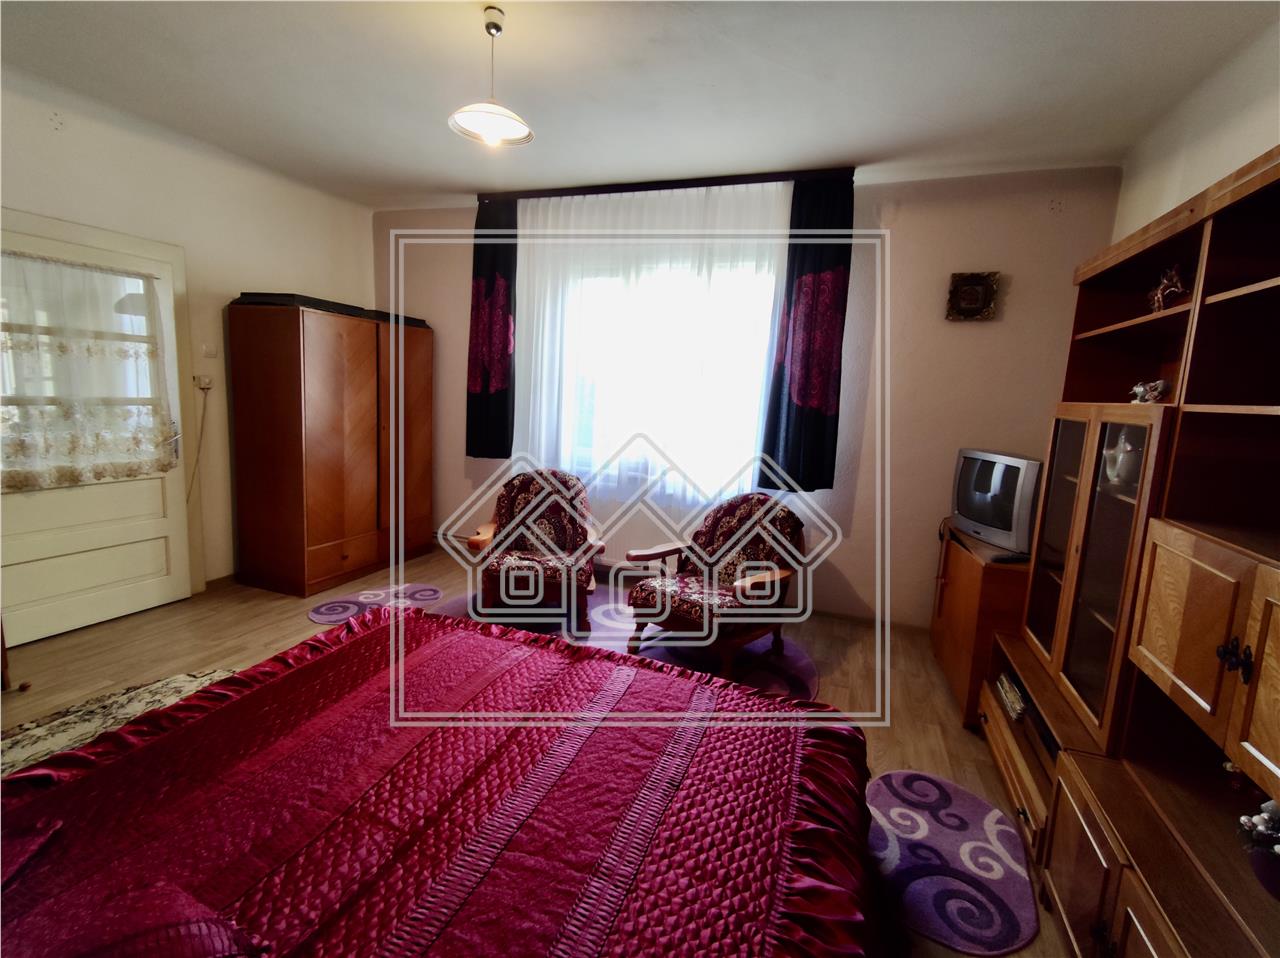 One bedroom apartment for rent in Sibiu